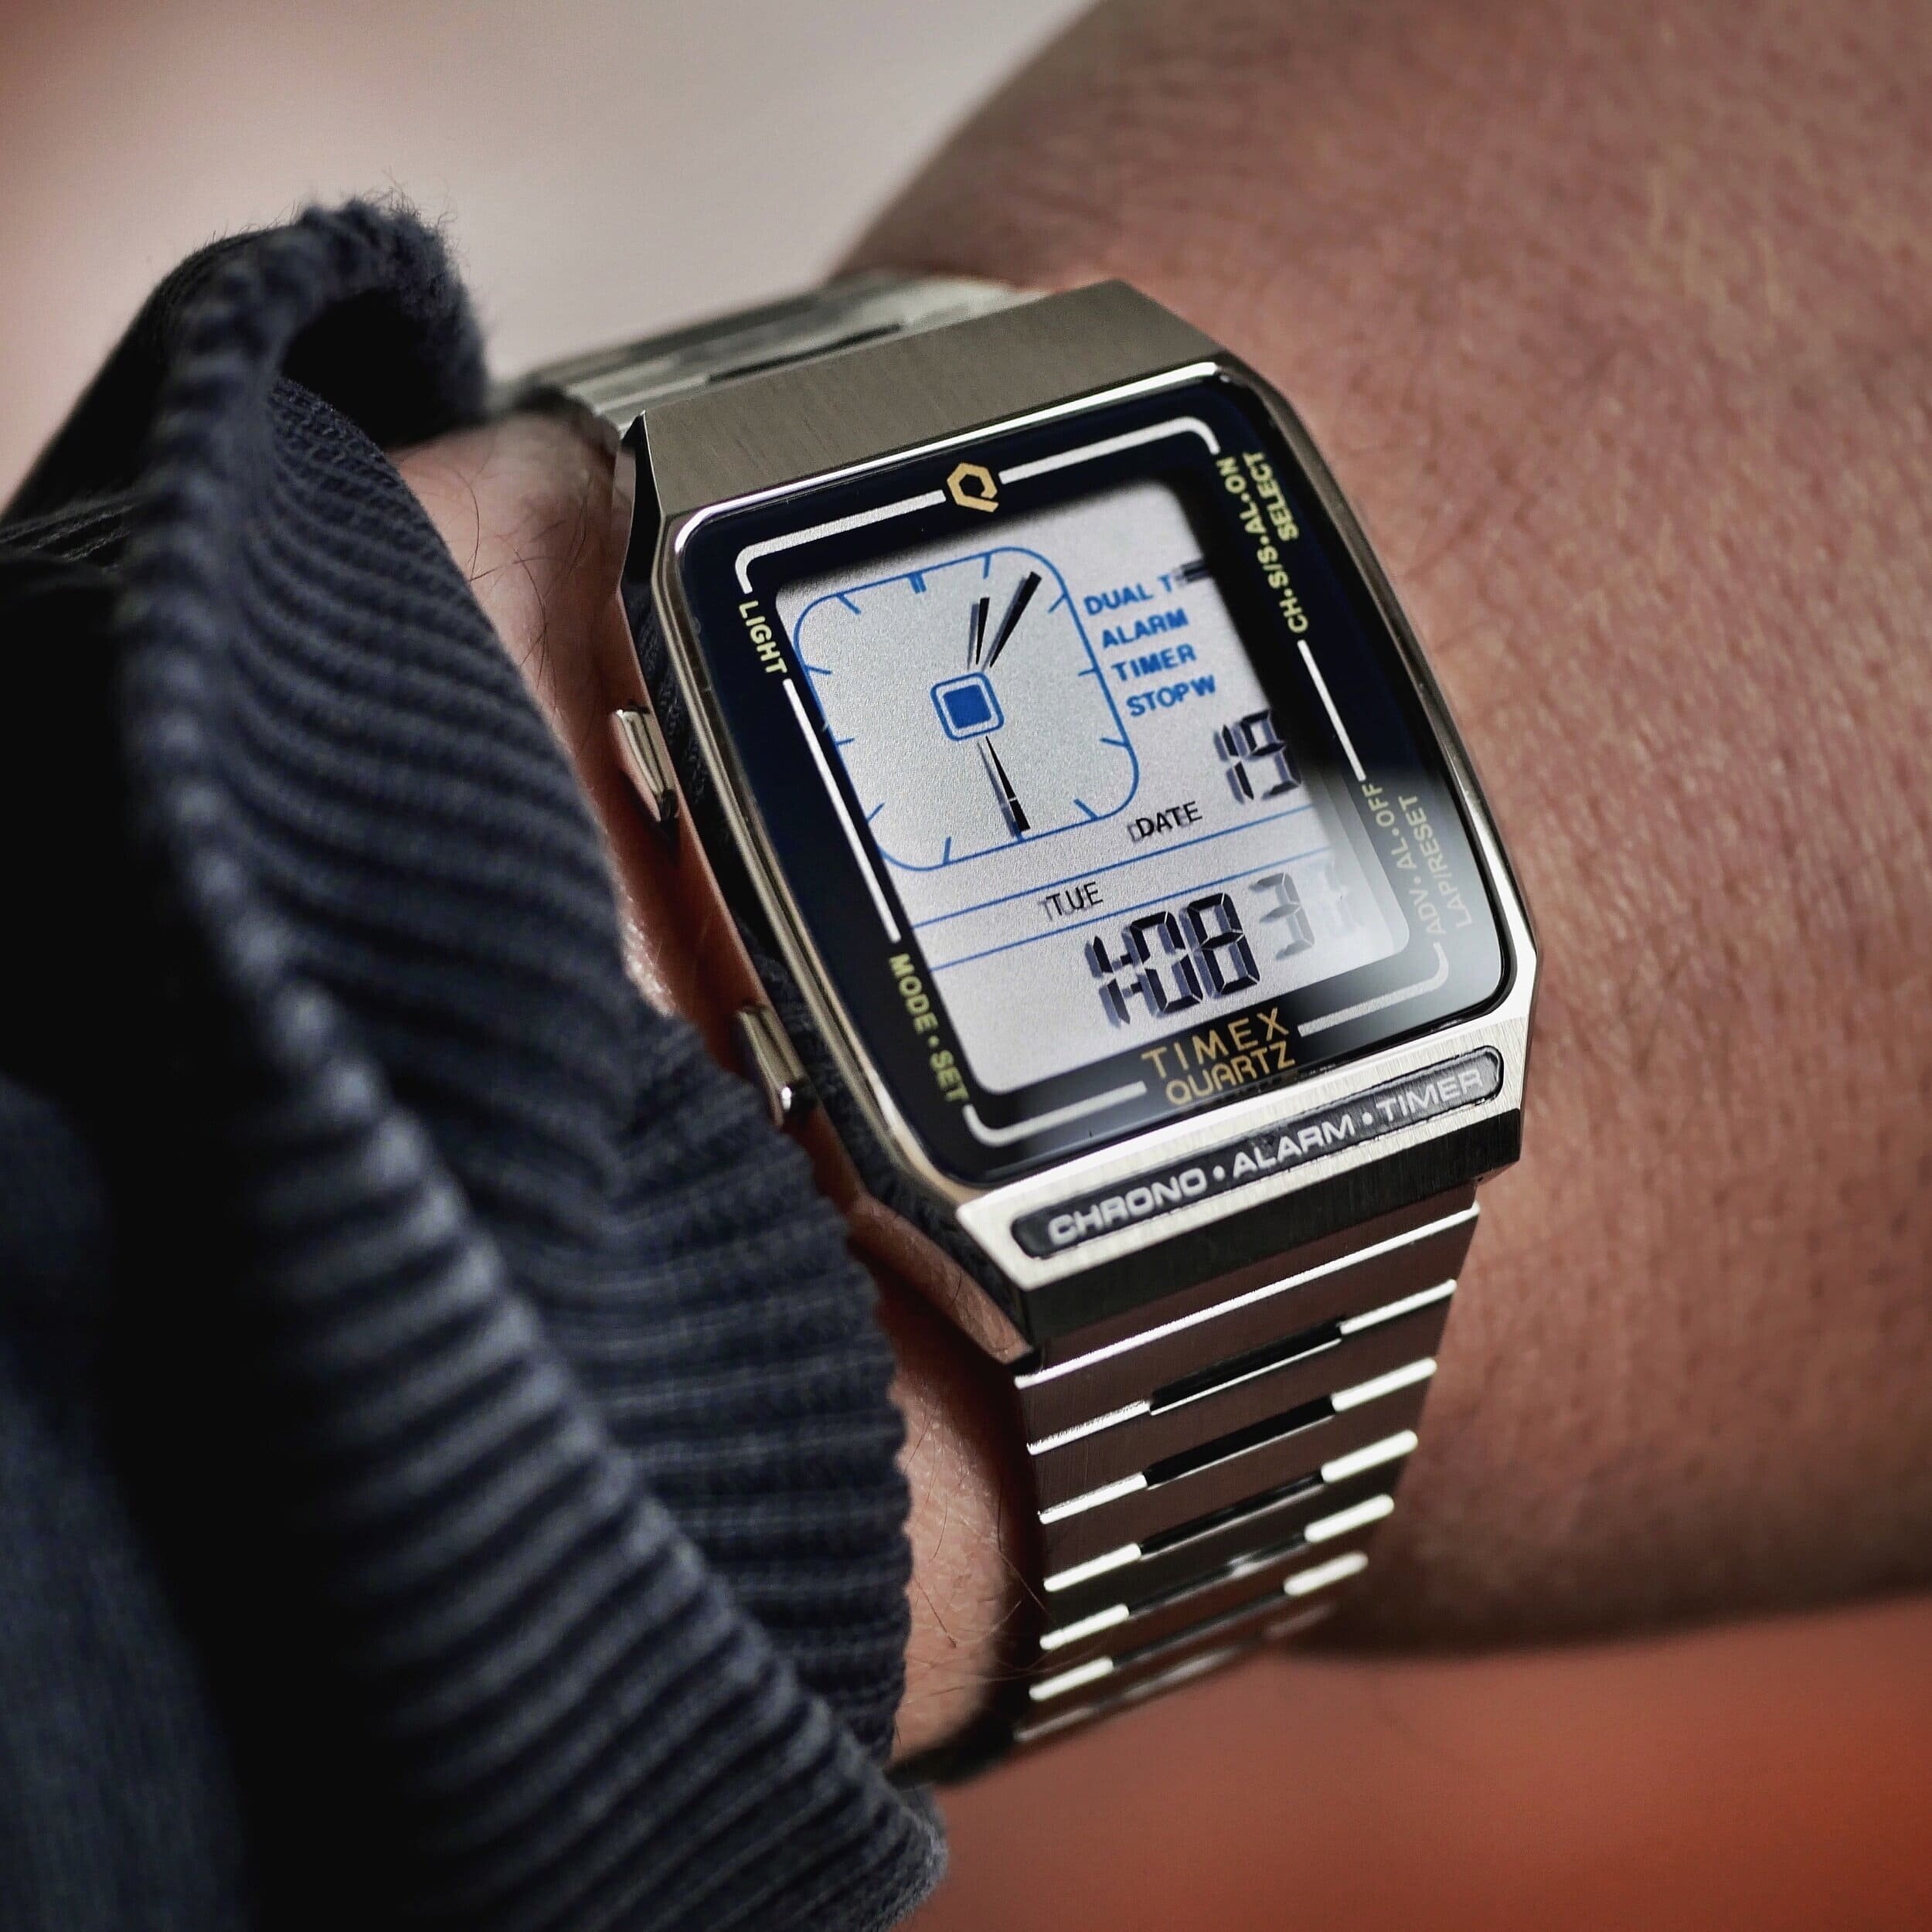 Timex Q LCA Watch Review: Is It the Best Retro Watch Under $200 